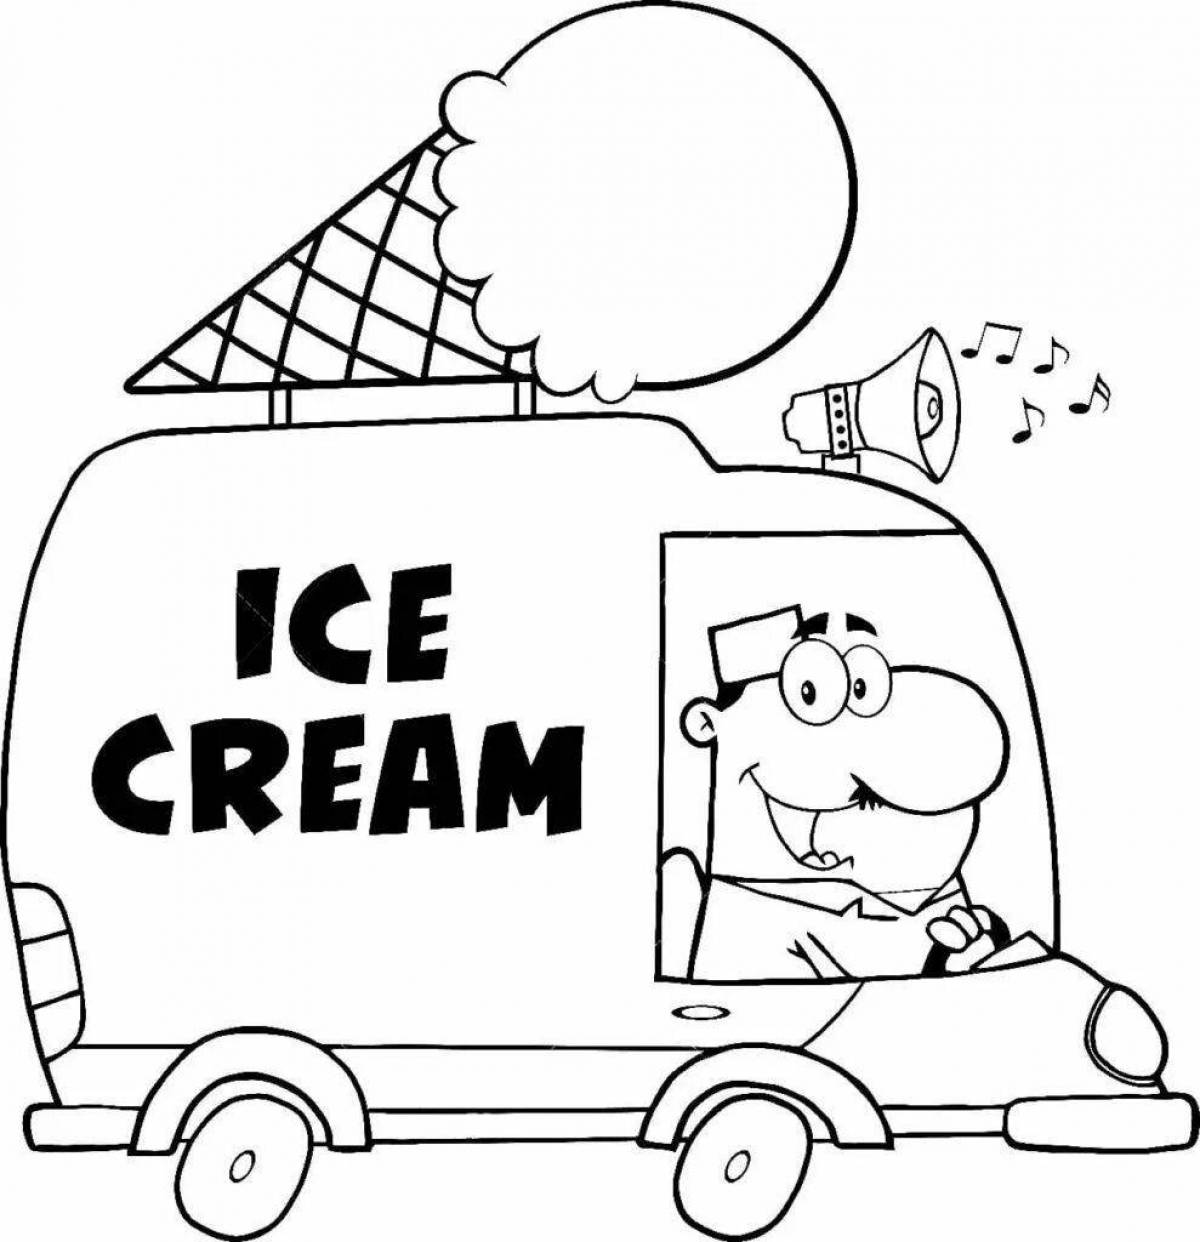 Coloring page exciting ice cream truck